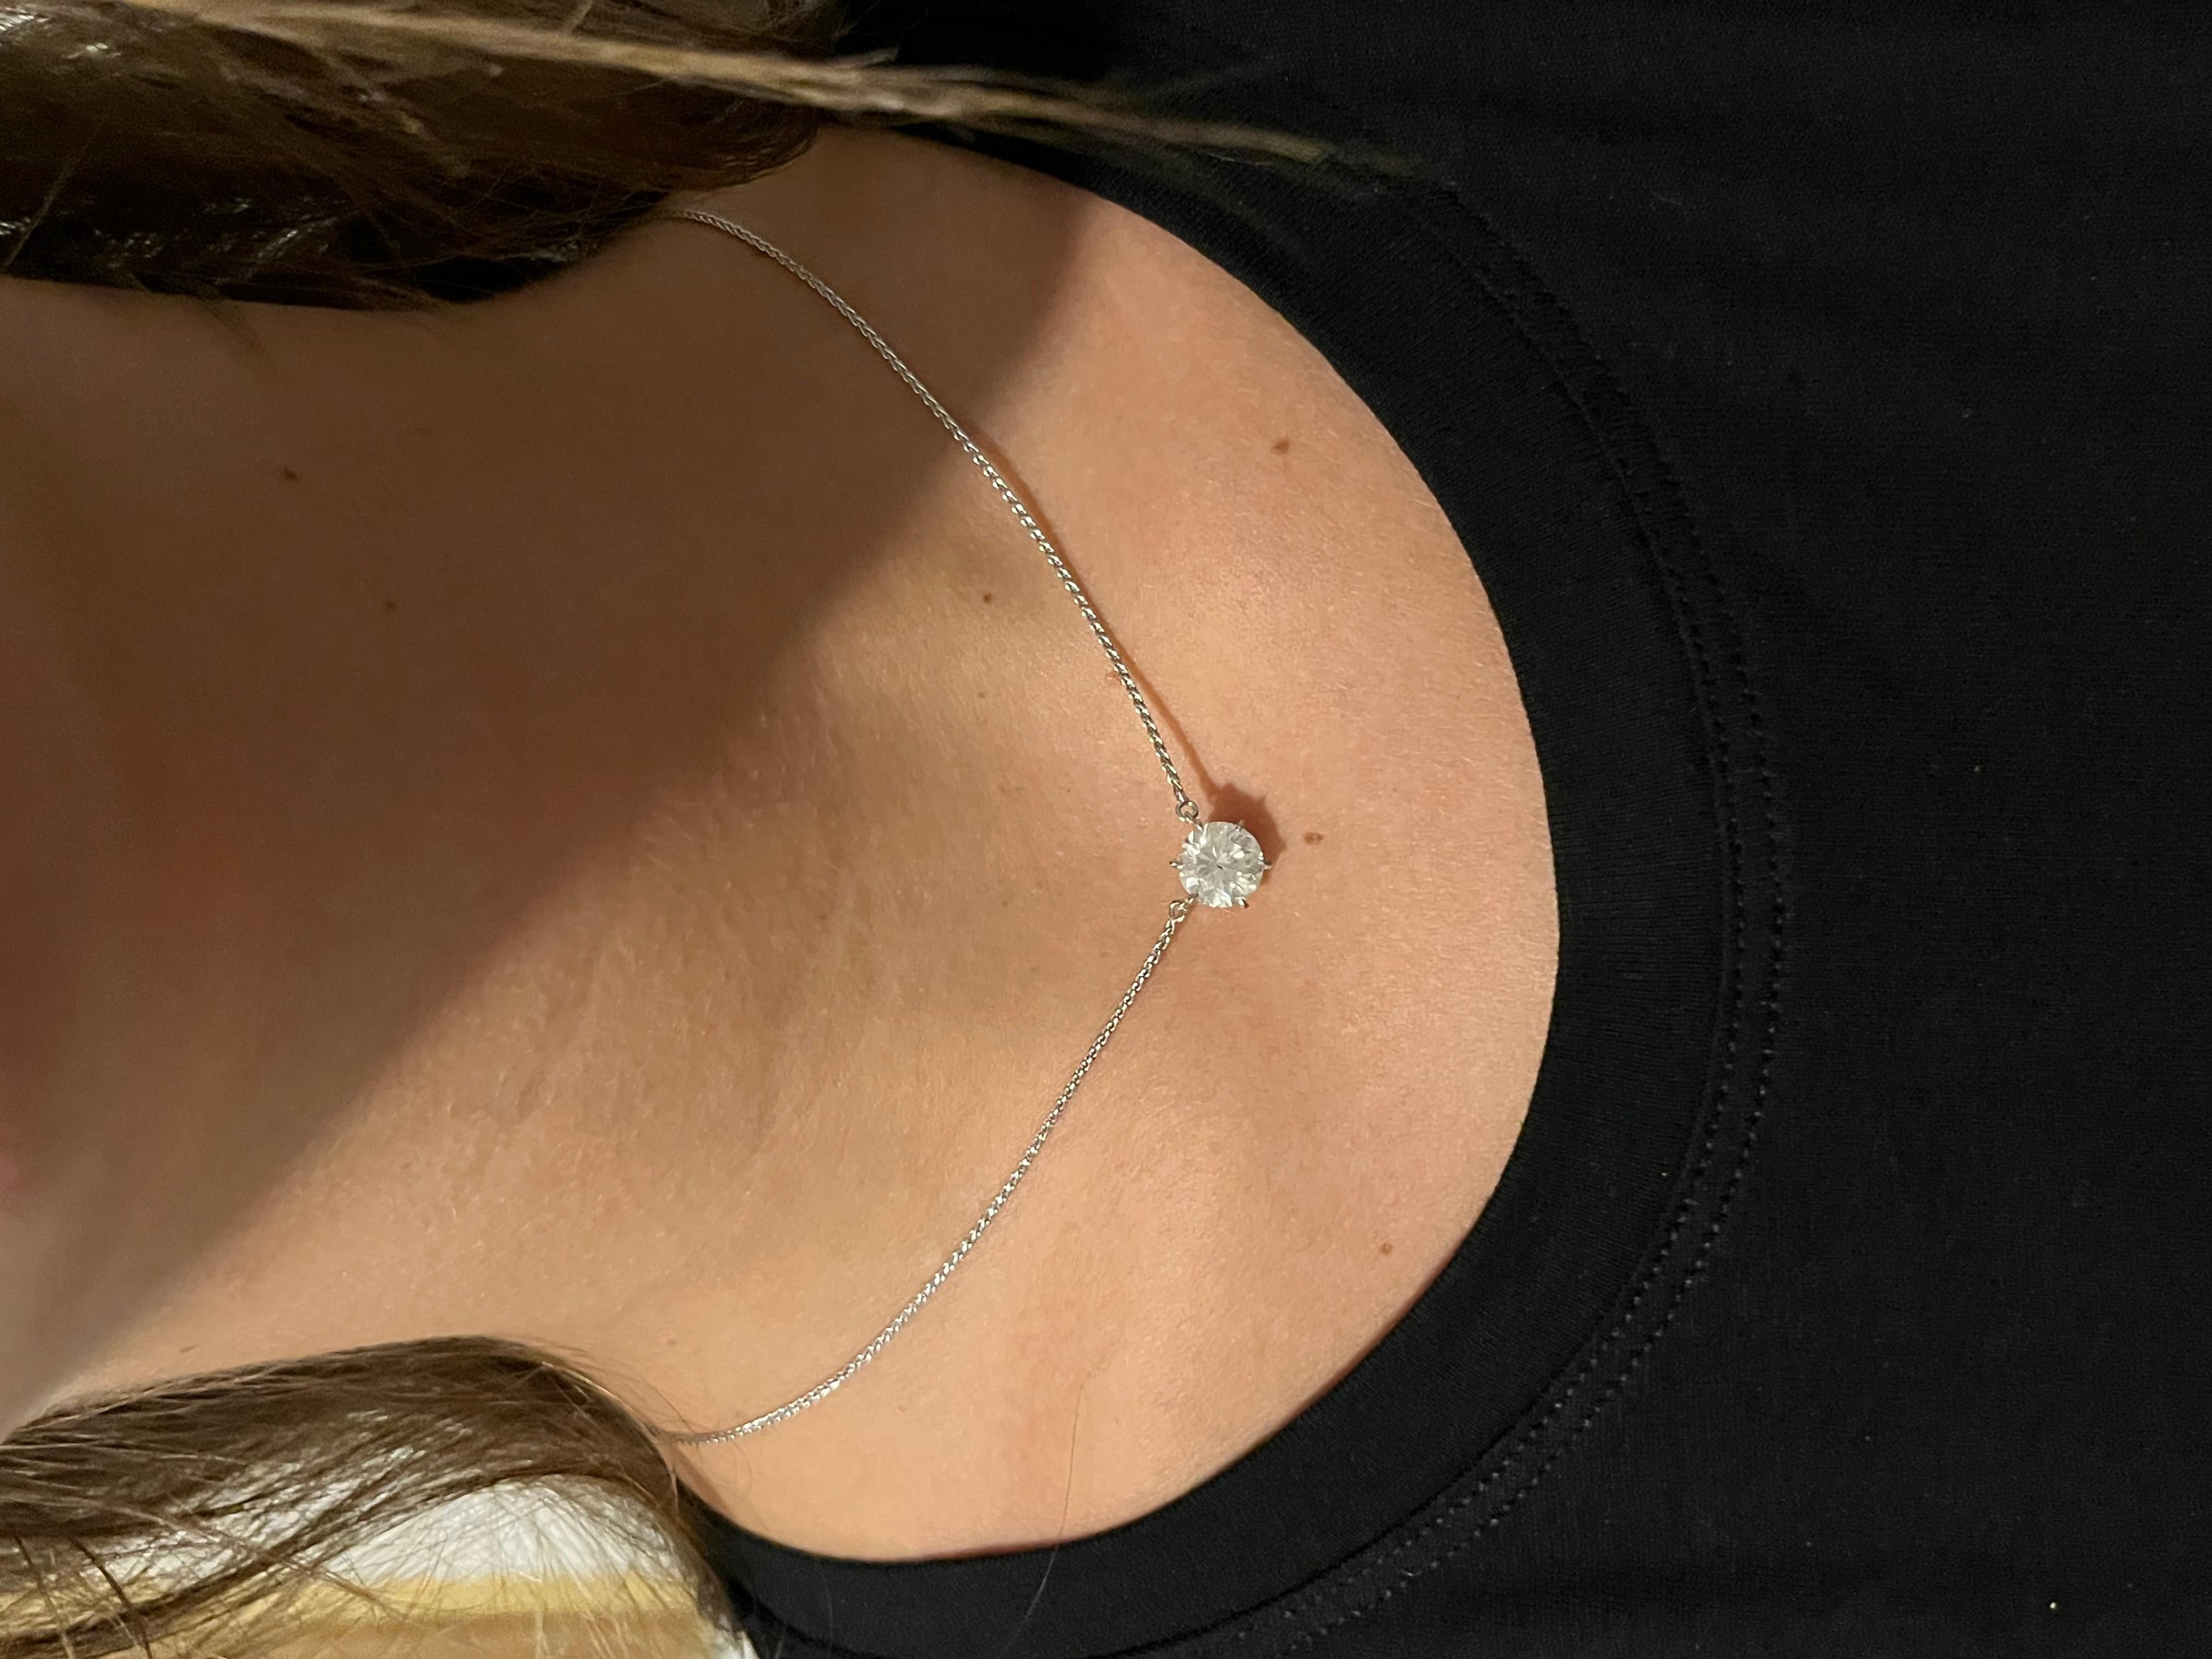 2.29 carat natural round cut diamond set in a 6 prong 14k white gold integral setting. The setting is seamlessly integrated with a 14k solid white gold cable chain of 2mm and 16 inches. A classic and timeless piece ideal for everyday wear. 
 
✔ Gold